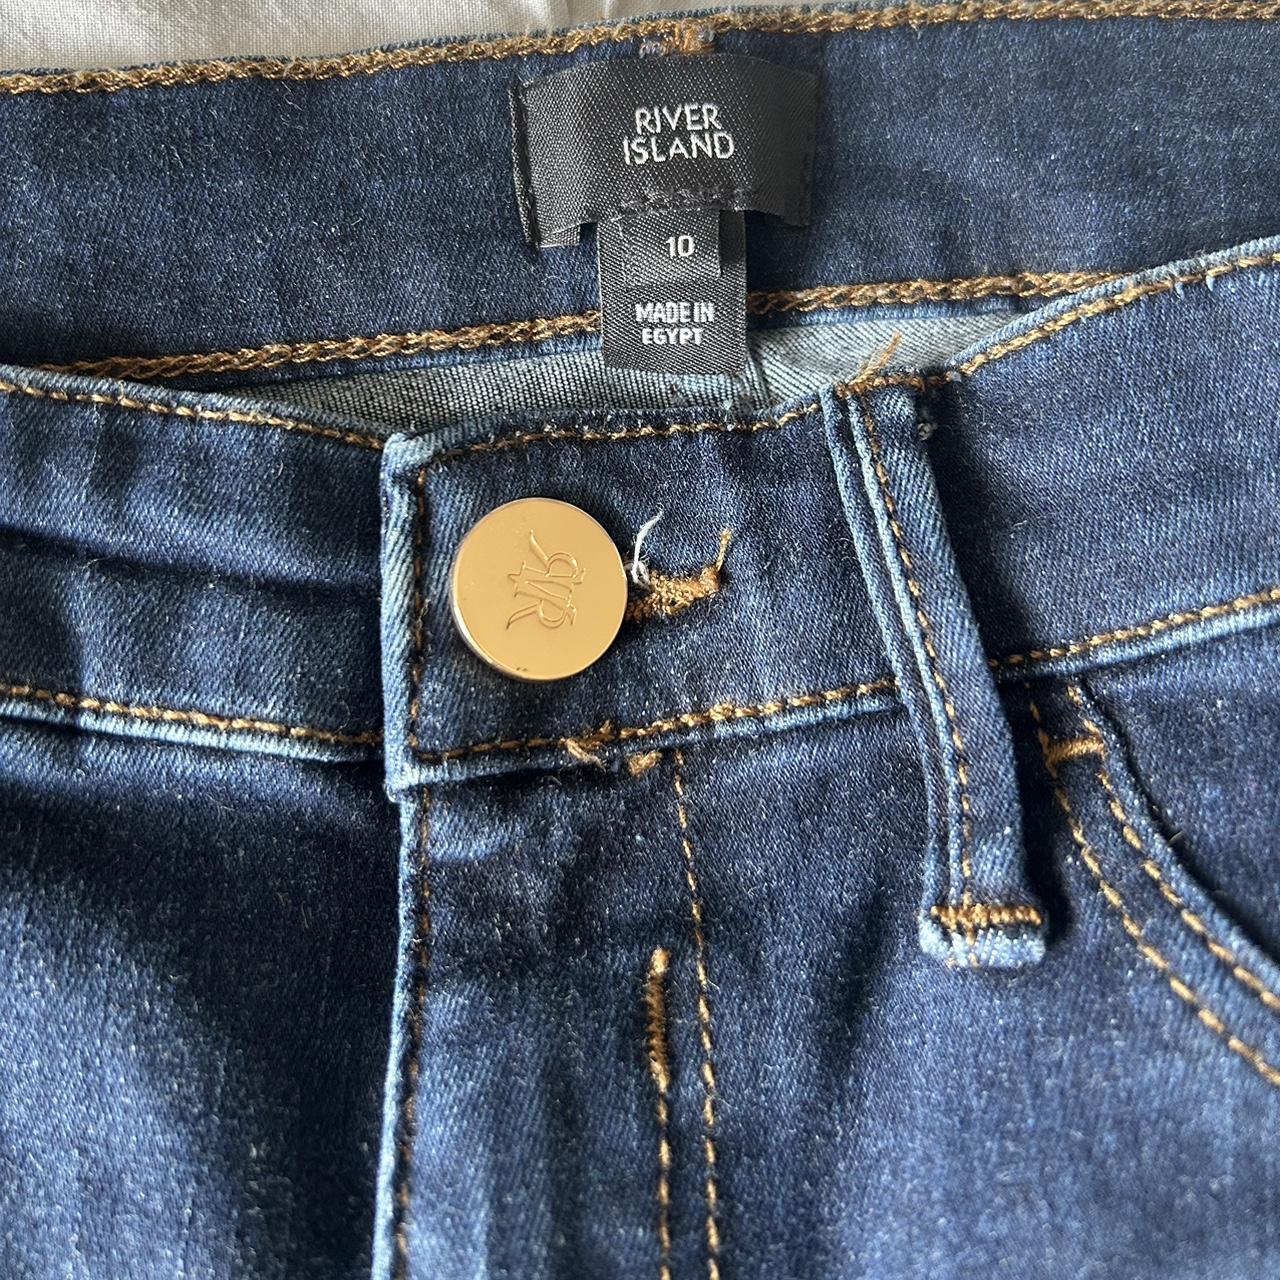 River Island jeans, never worn. Size 10 but fits an... - Depop